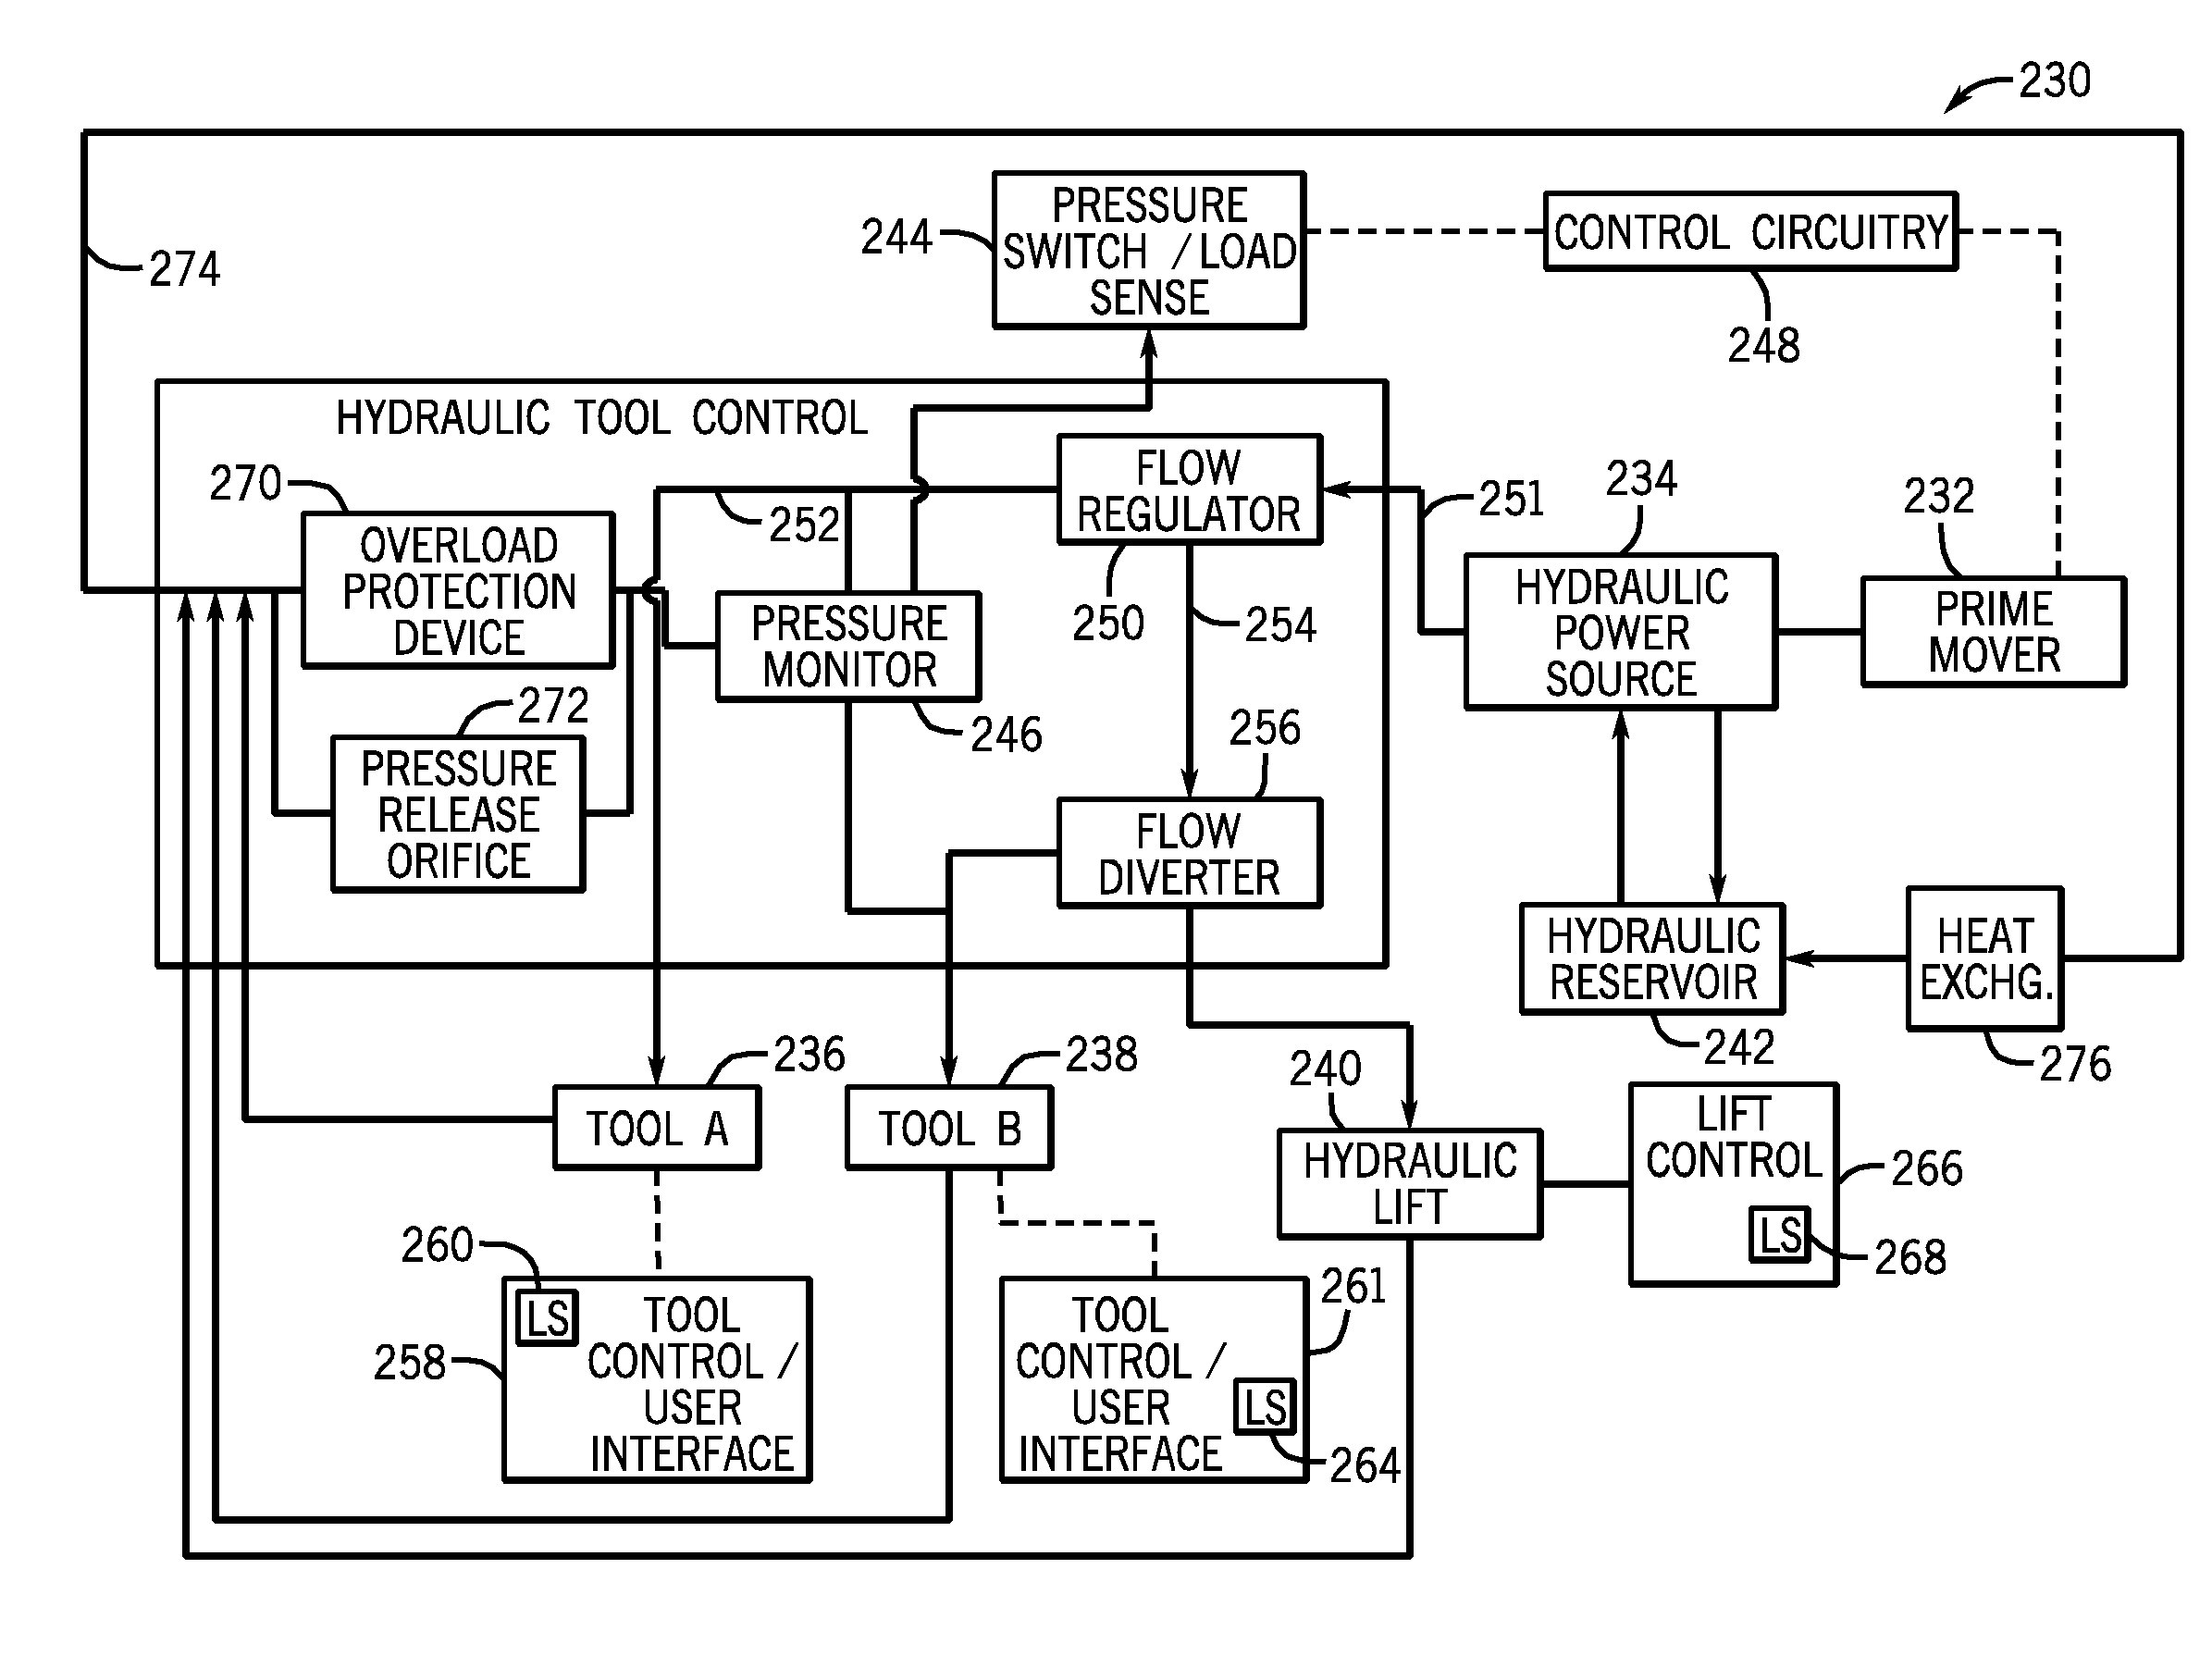 Operator interface for hydraulic tool control